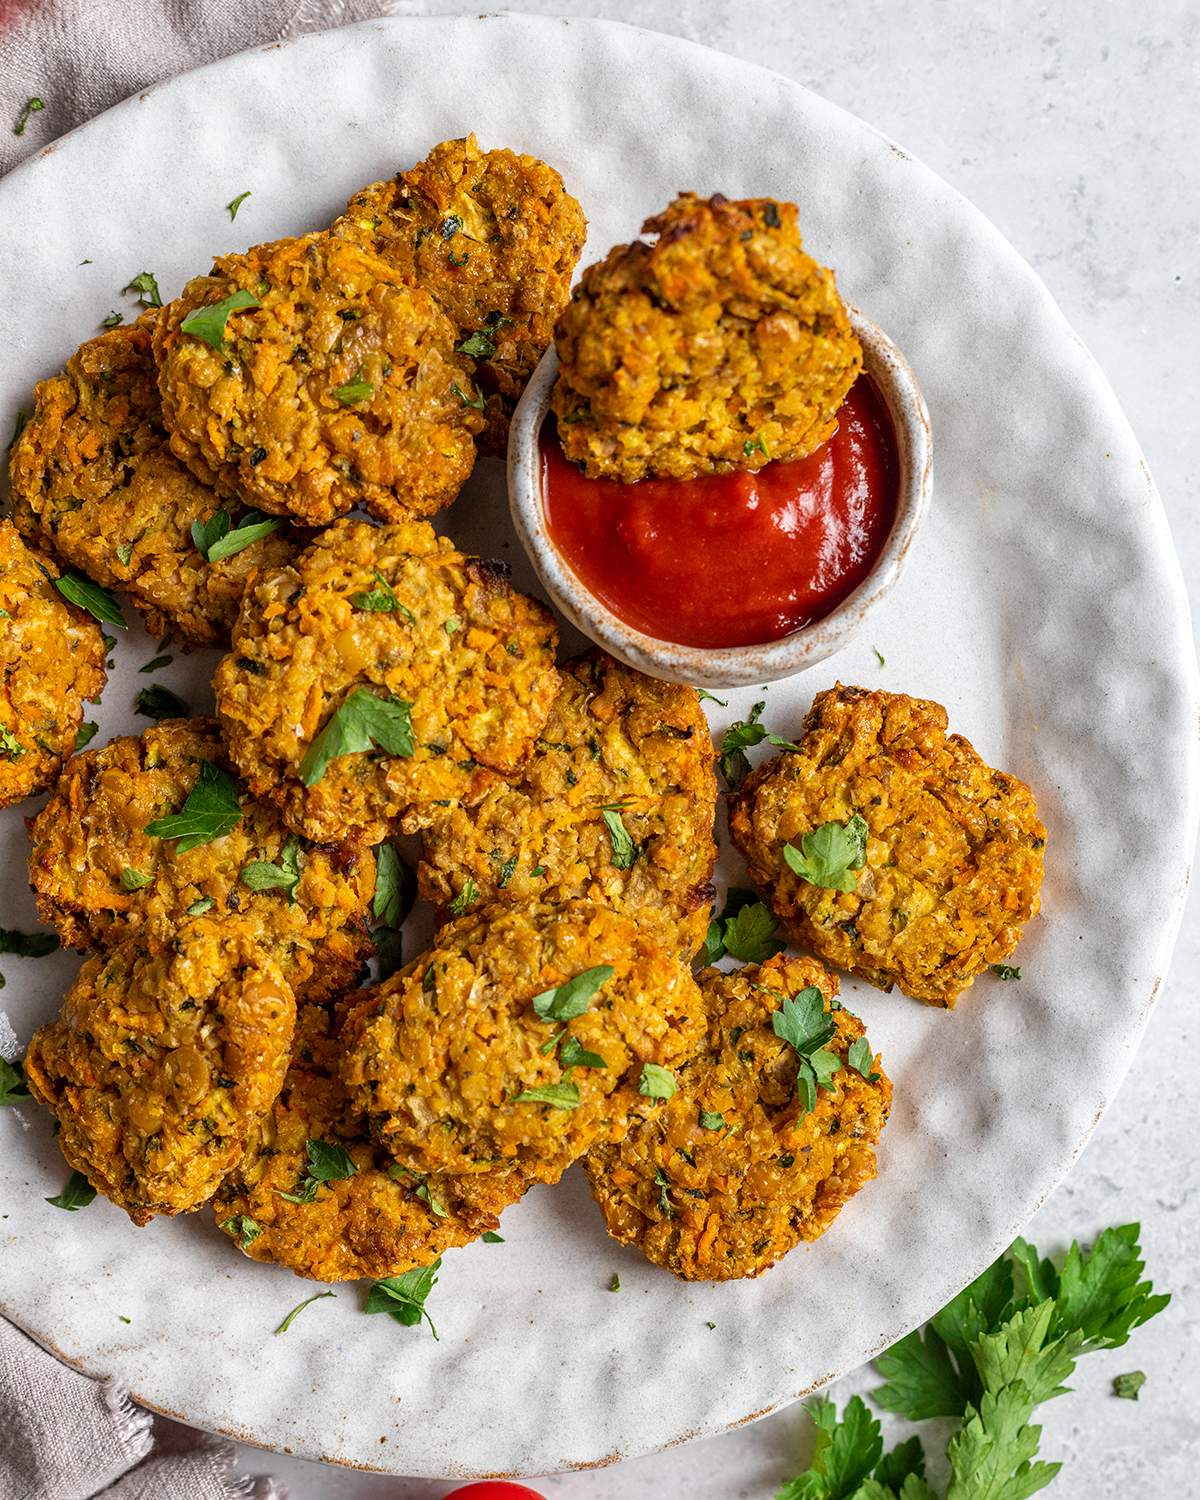 Vegan chickpea chicken nuggets are seen on a round serving platter with a small bowl of dip on the side.